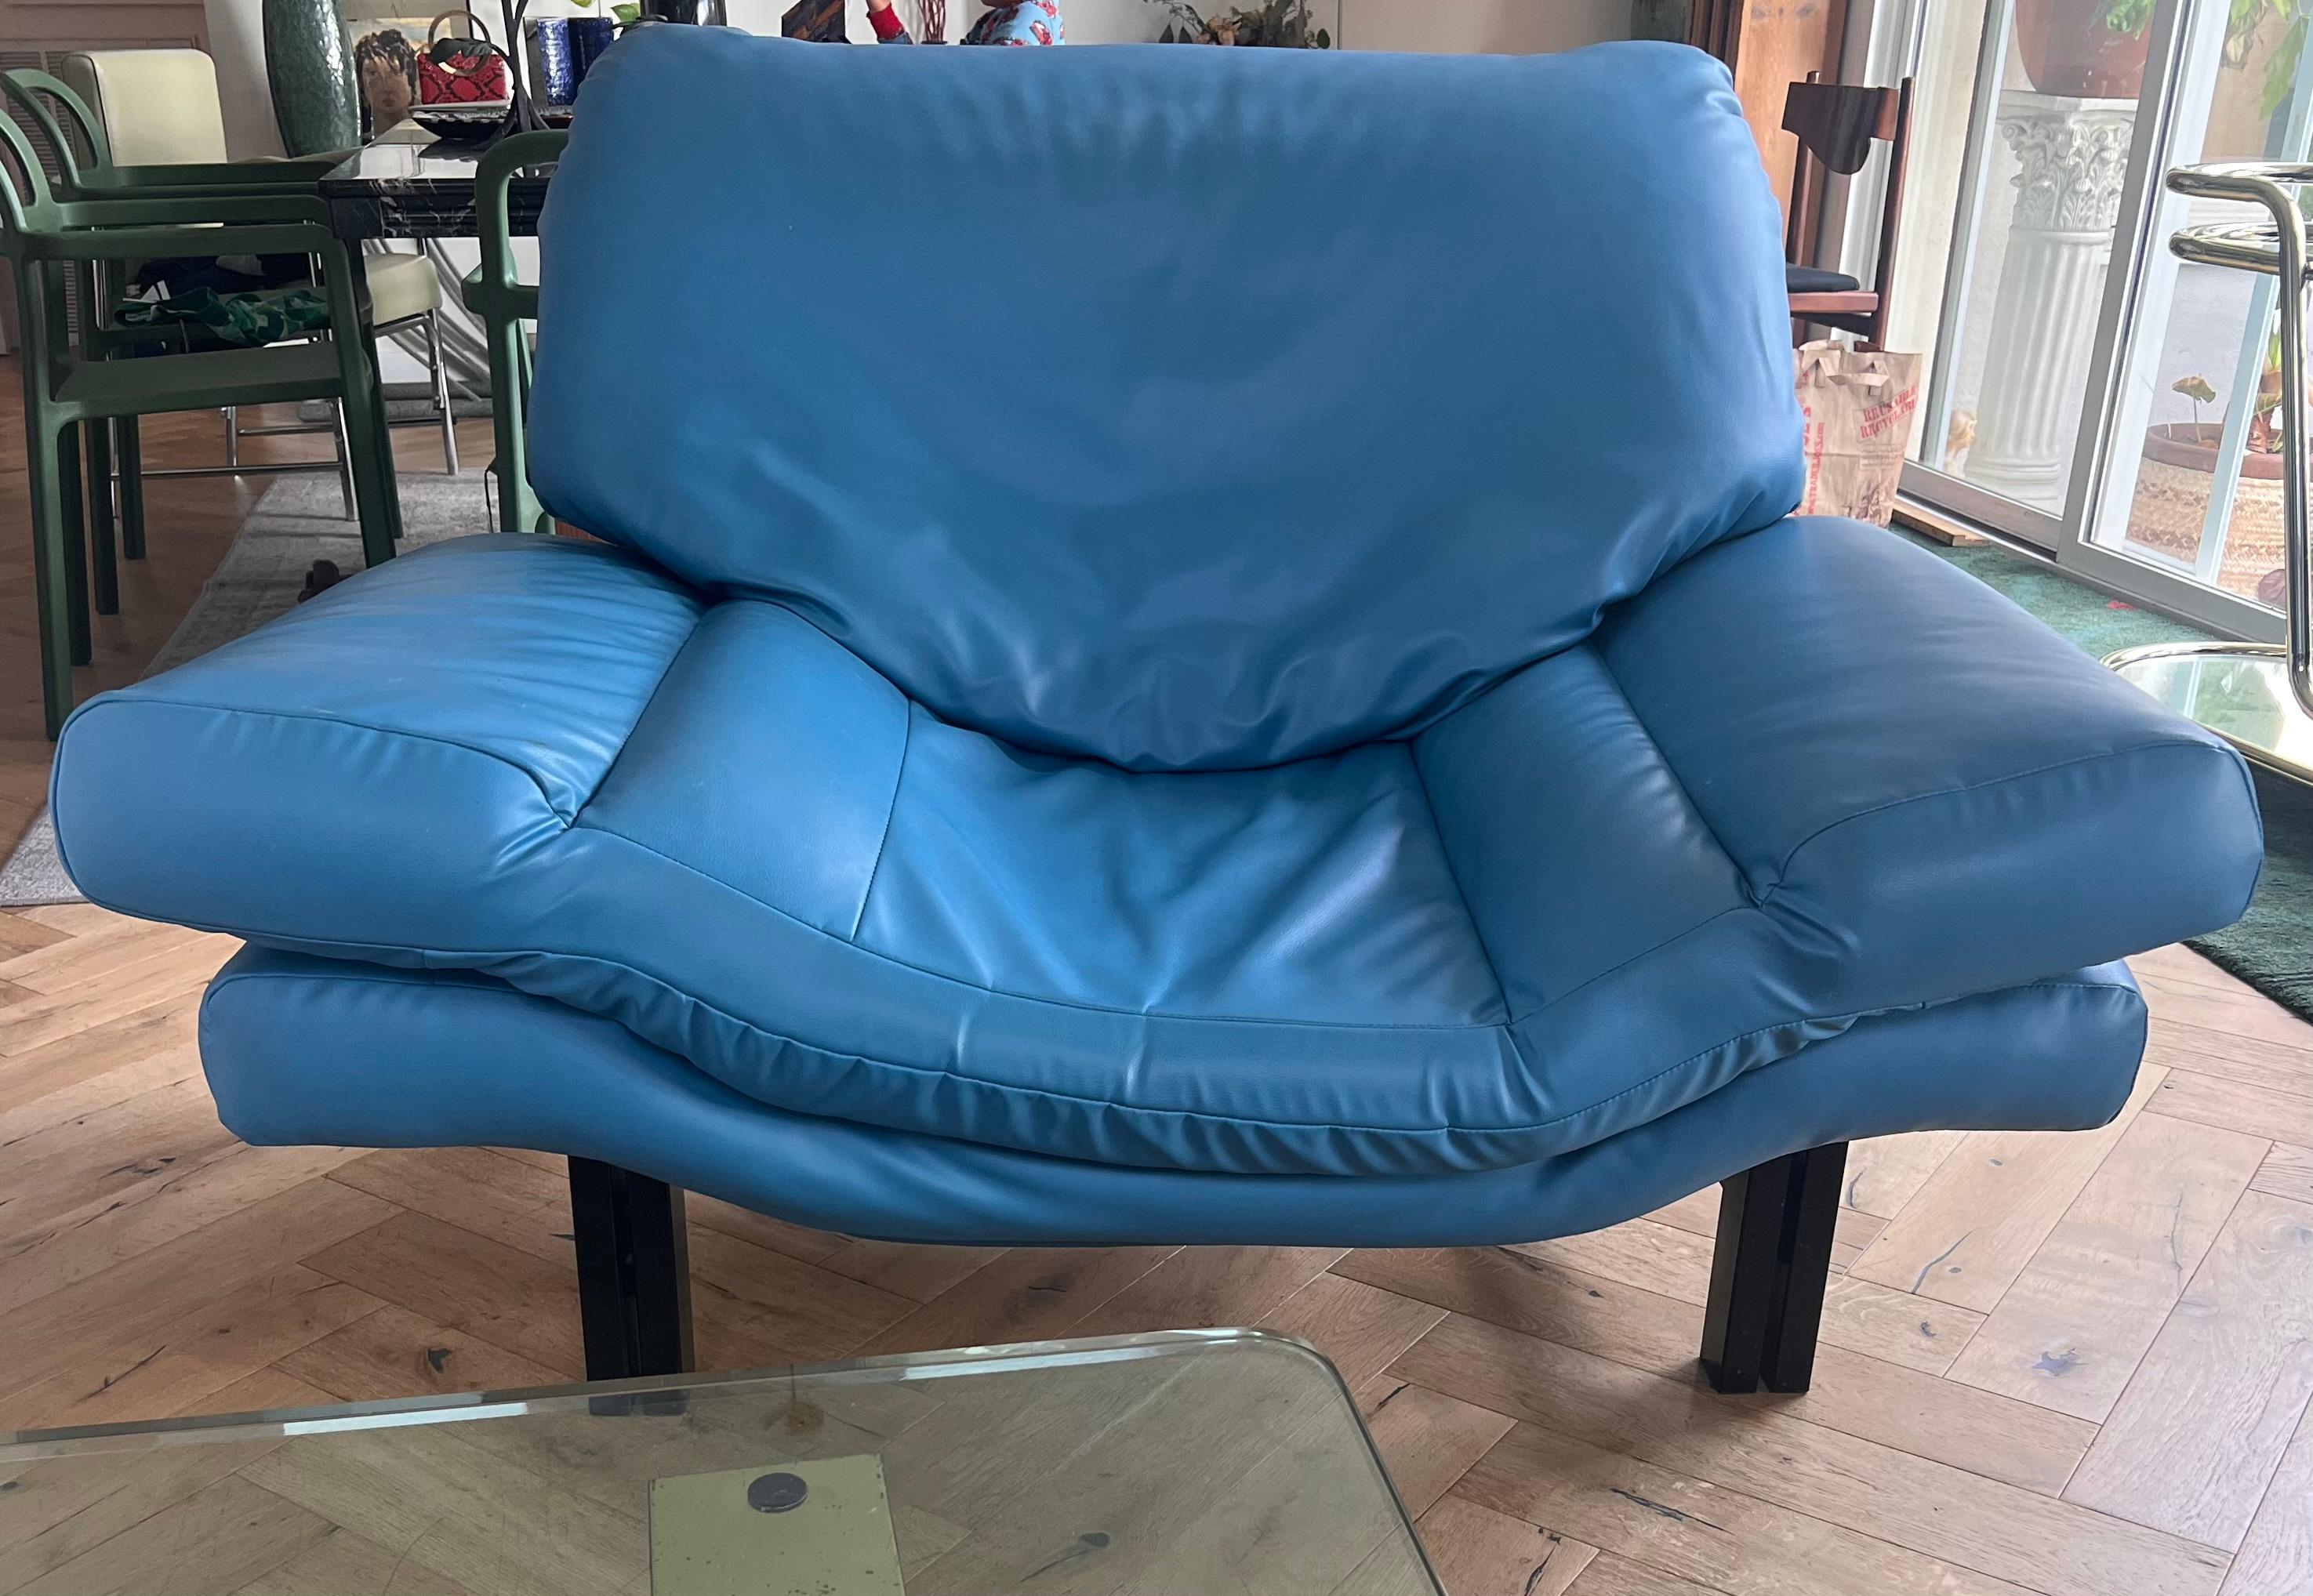 A postmodern lounge club chair in striking cerulean blue faux leather, late 20th century. Possibly by Italian designer Nicoletti Salotti. Black sculptural metal frame. Some wear as shown in photos. Pick up in central west Los Angeles or we ship